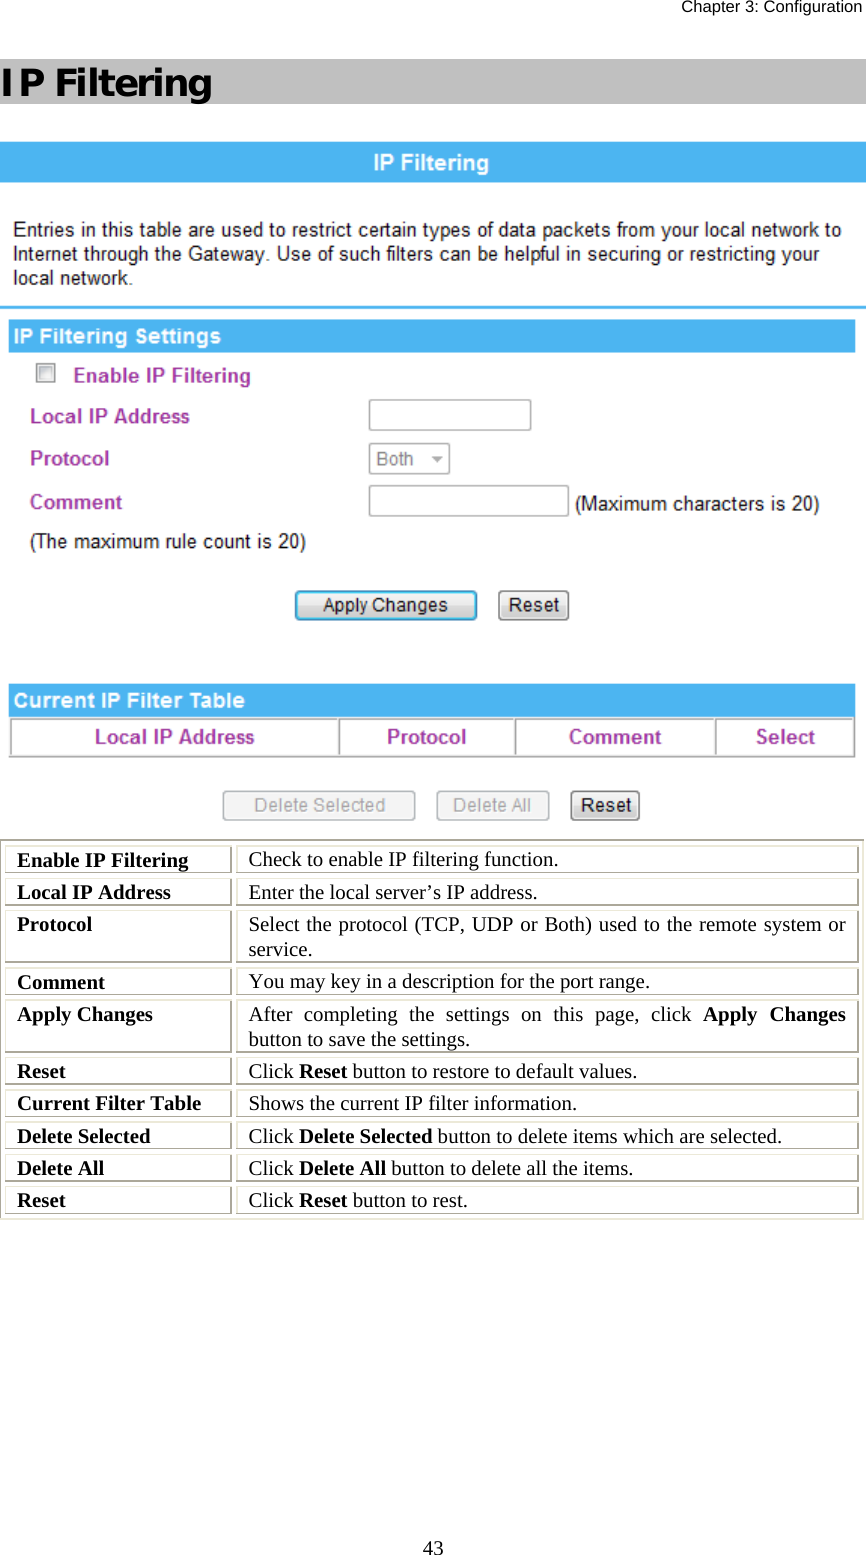   Chapter 3: Configuration  43IP Filtering  Enable IP Filtering  Check to enable IP filtering function. Local IP Address  Enter the local server’s IP address. Protocol  Select the protocol (TCP, UDP or Both) used to the remote system or service. Comment  You may key in a description for the port range. Apply Changes  After completing the settings on this page, click Apply Changes button to save the settings. Reset  Click Reset button to restore to default values. Current Filter Table  Shows the current IP filter information. Delete Selected  Click Delete Selected button to delete items which are selected. Delete All  Click Delete All button to delete all the items. Reset  Click Reset button to rest.  